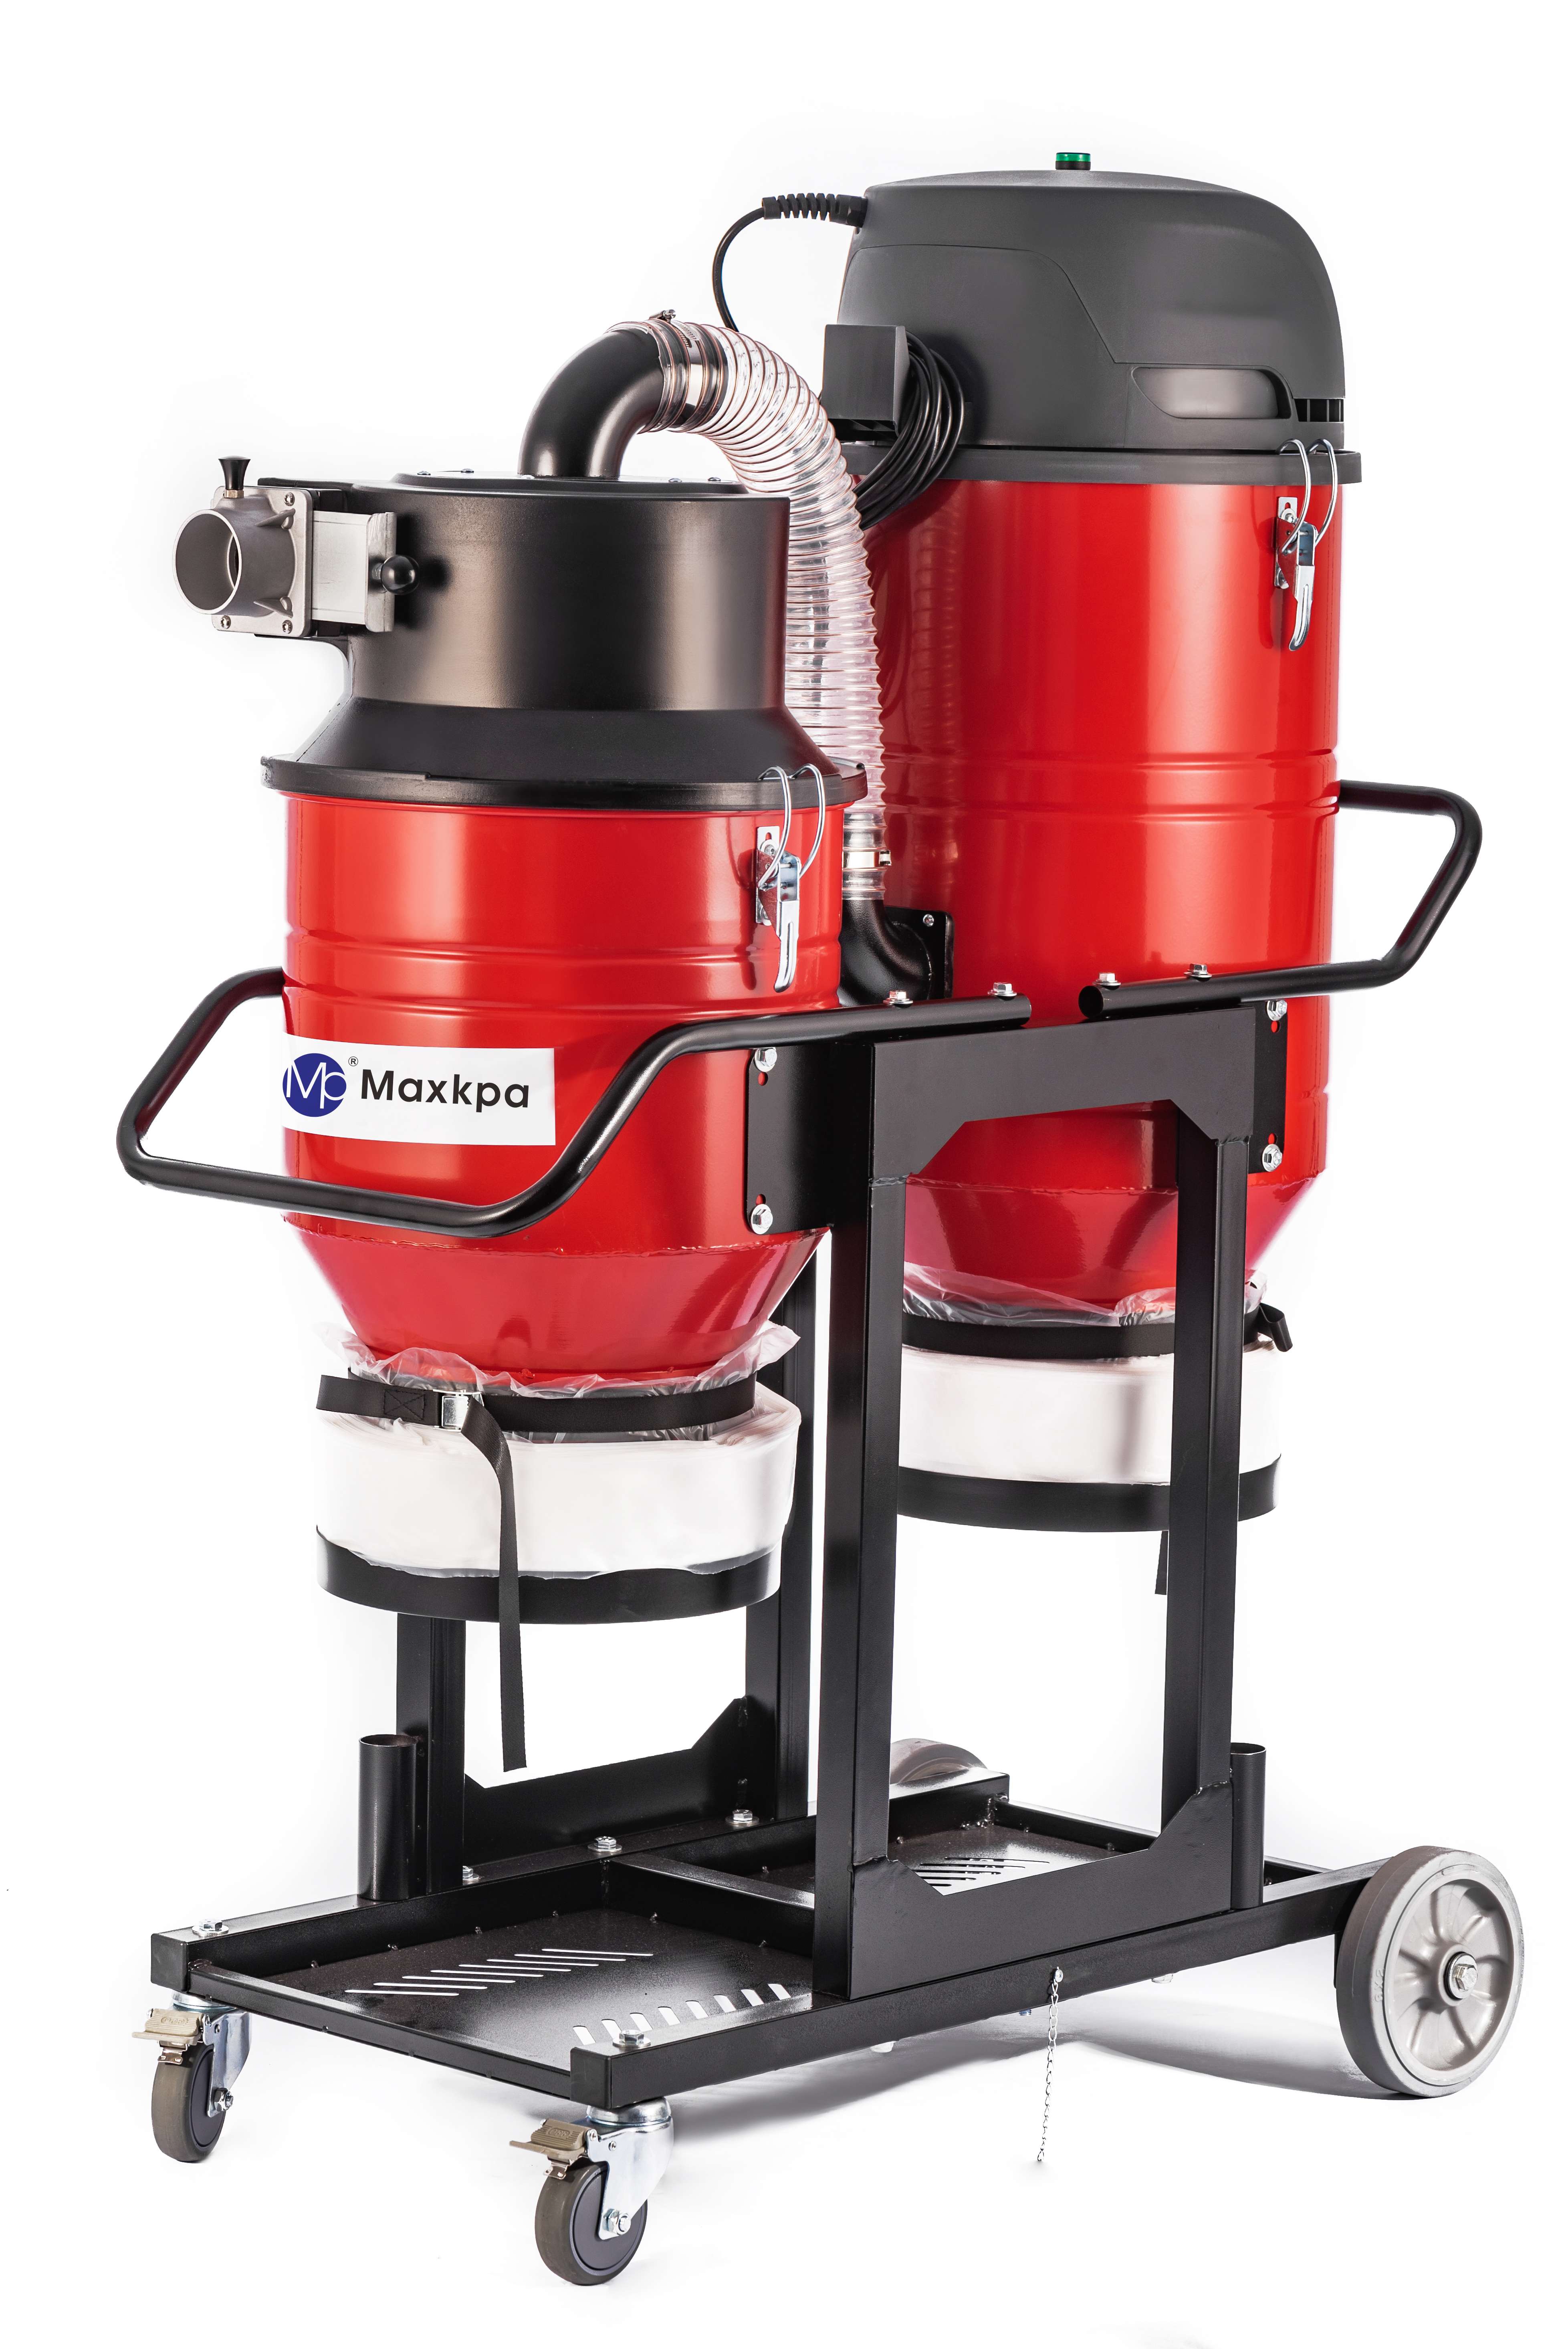 Industrial Vacuum Cleaners Market: The Rise of a New Era in Cleaning Industry